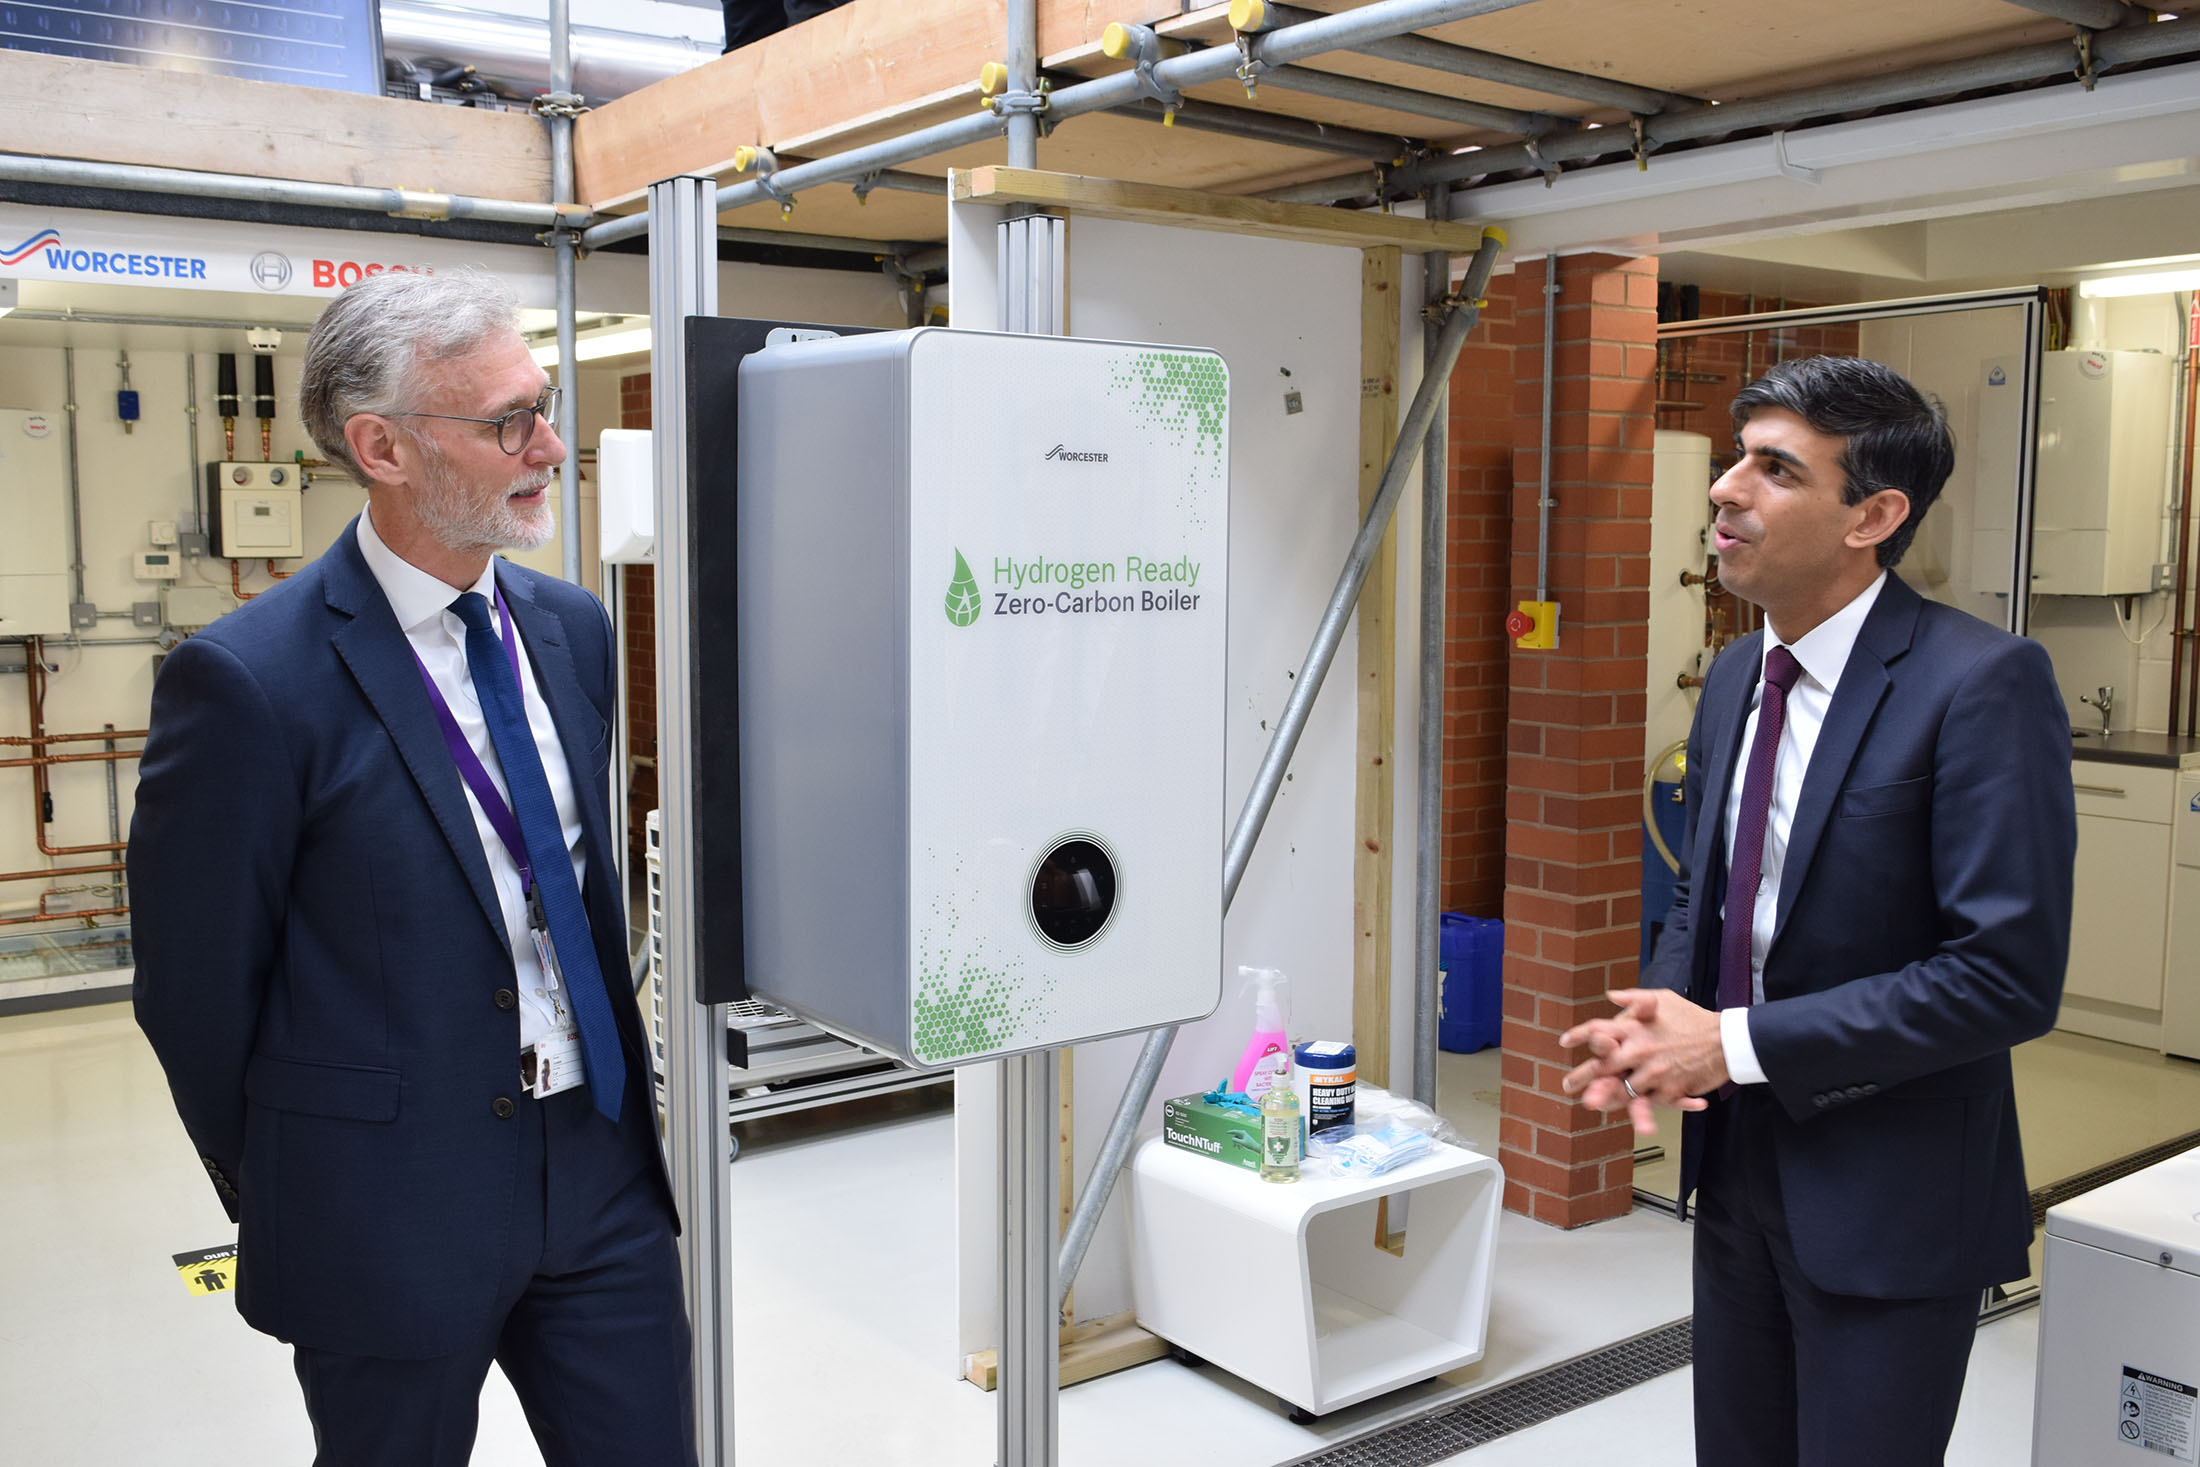 Worcester Bosch CEO invited to join the Prime Minister as he launches the Government’s plan for Green Investment and Growth @WorcesterBosch